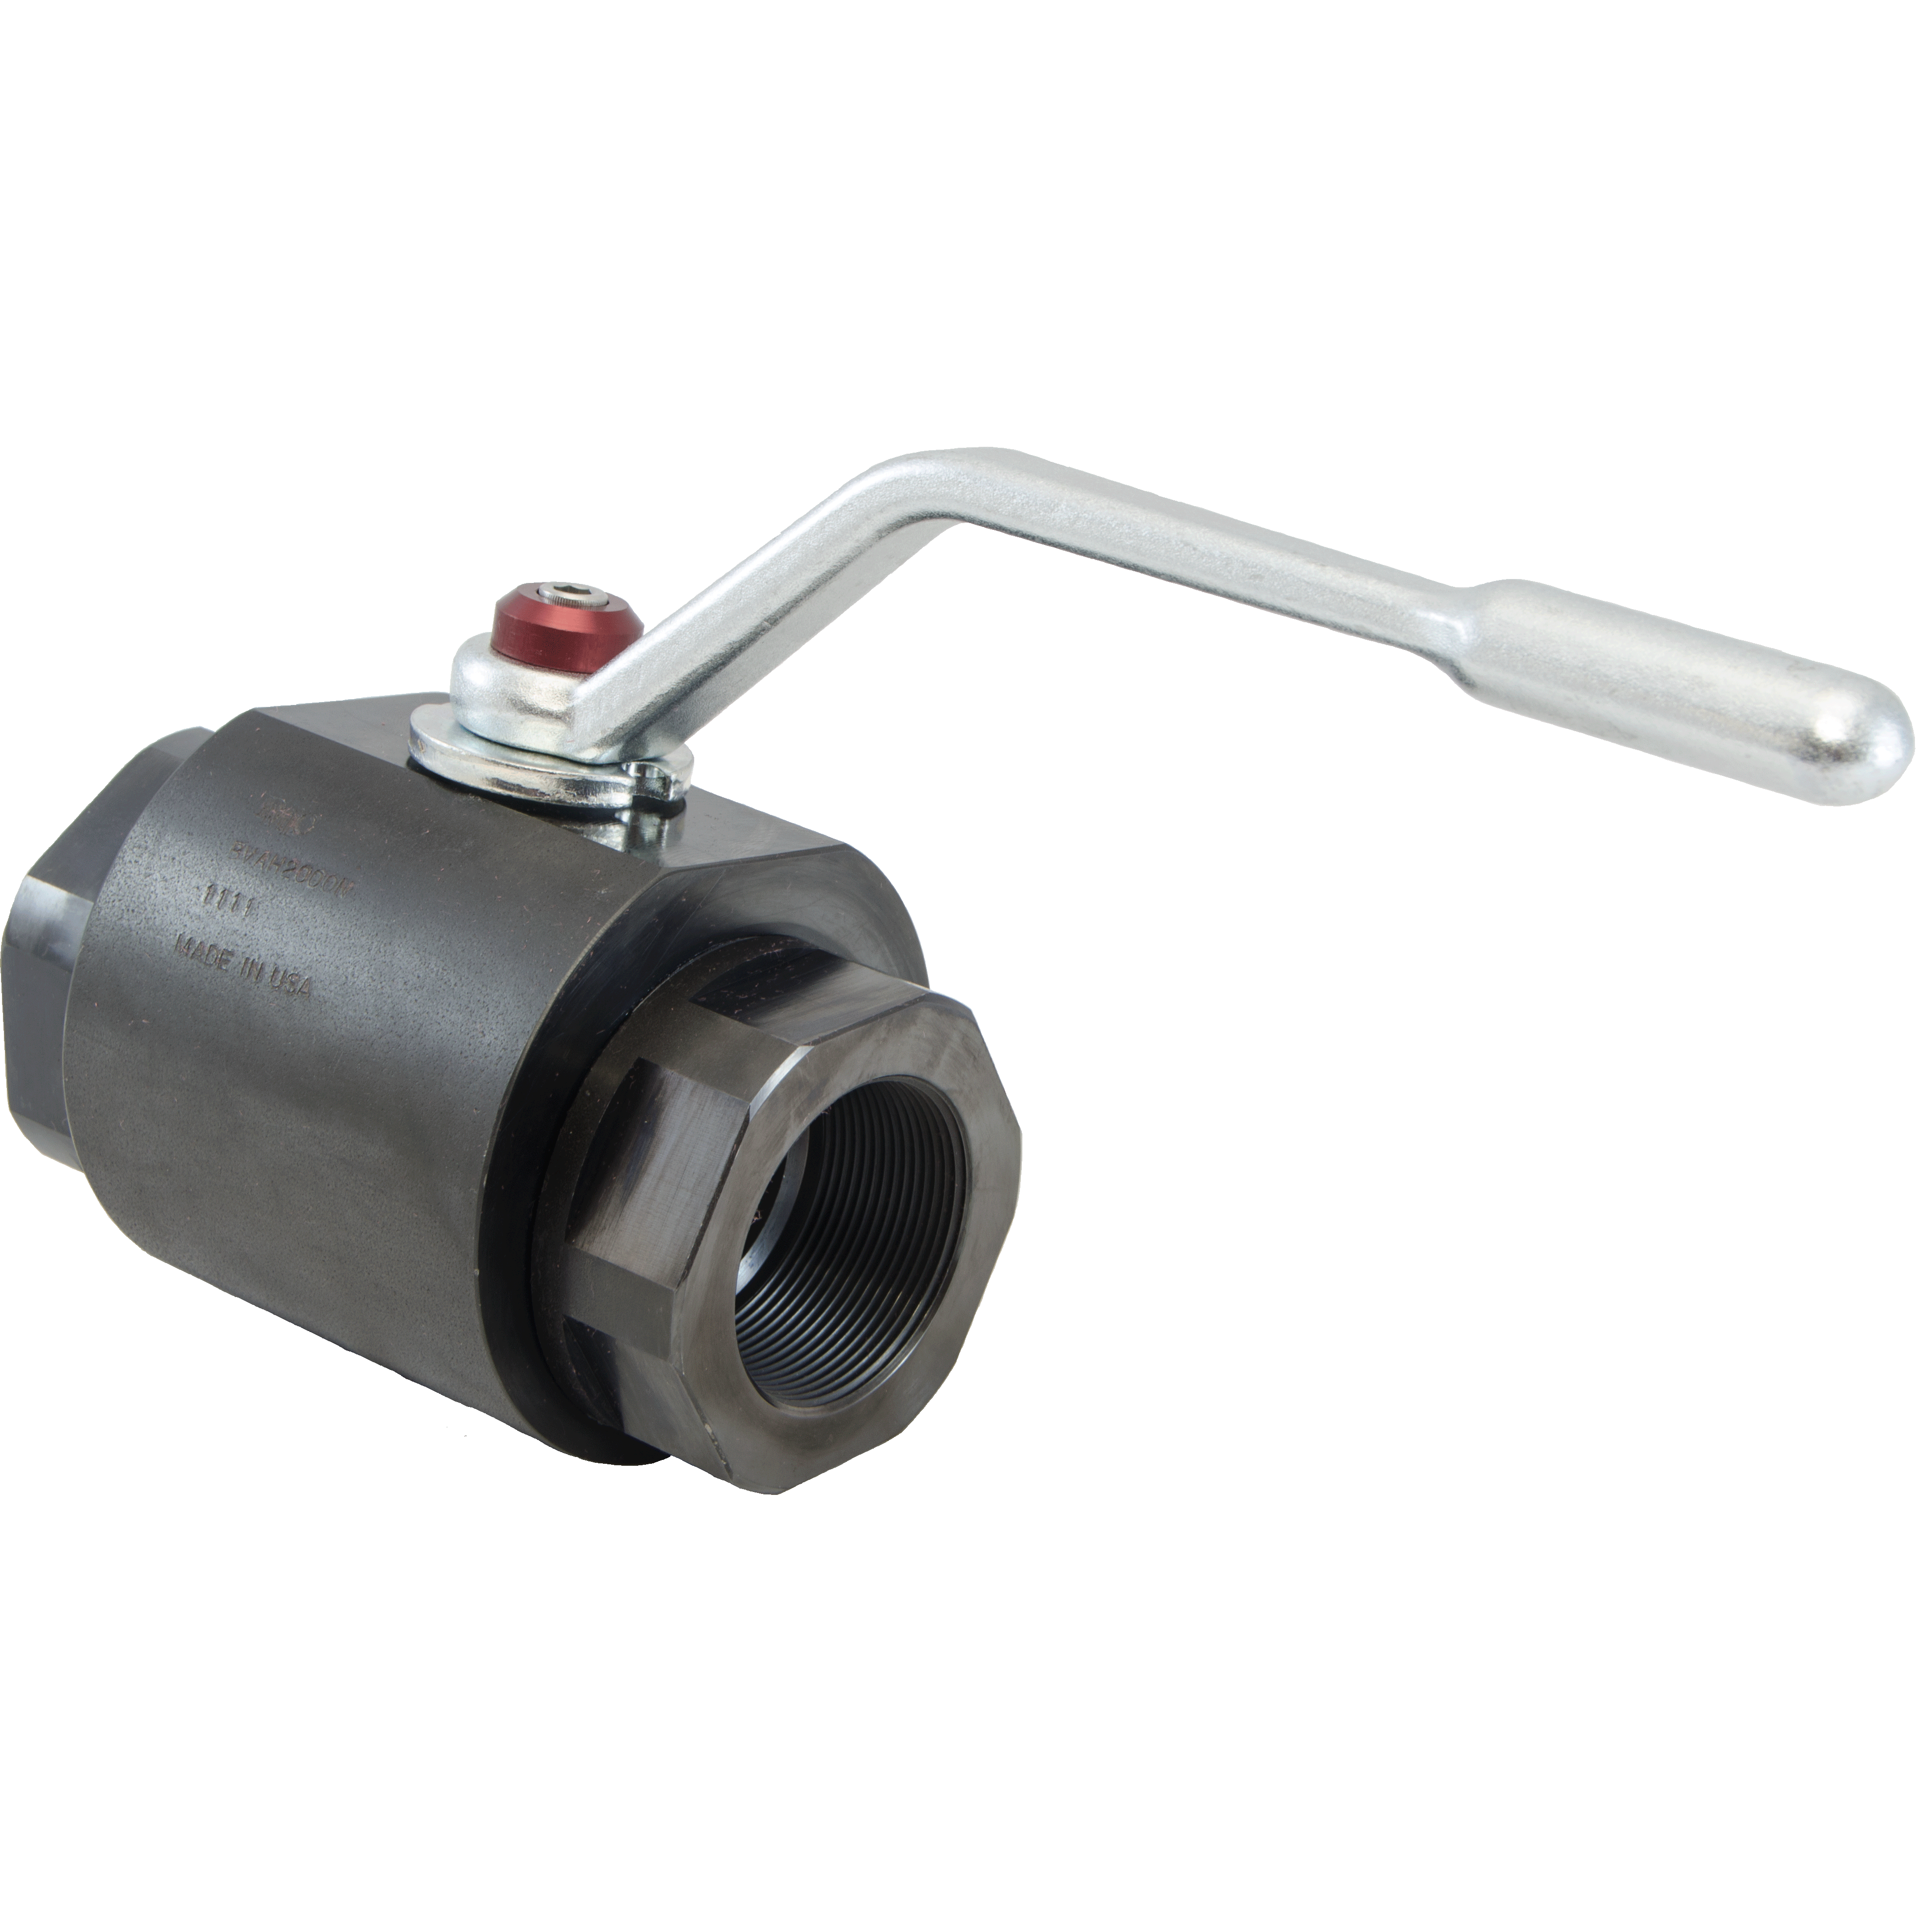 BVAH-1500S-1111 : DMIC Round Body Ball Valve, #24 SAE (3/8), Carbon Steel, 6000psi, Two-Way